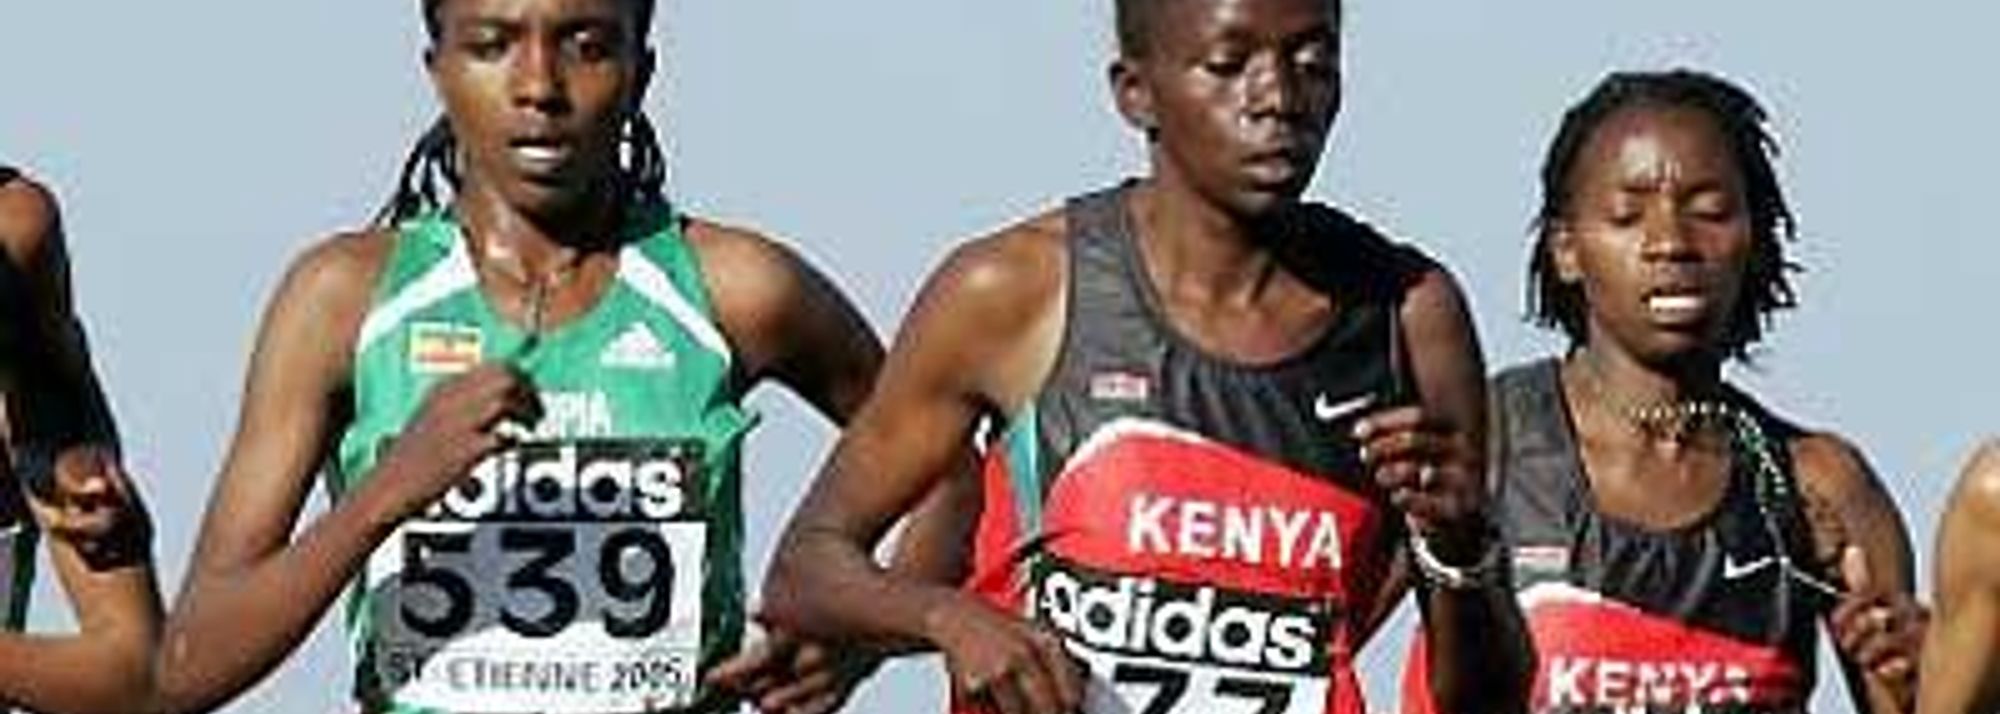 A generation ago, Derartu Tulu’s gold medal at 10,000 metres at the Barcelona Olympic Games was heralded as a breakthrough moment for East African women athletes.